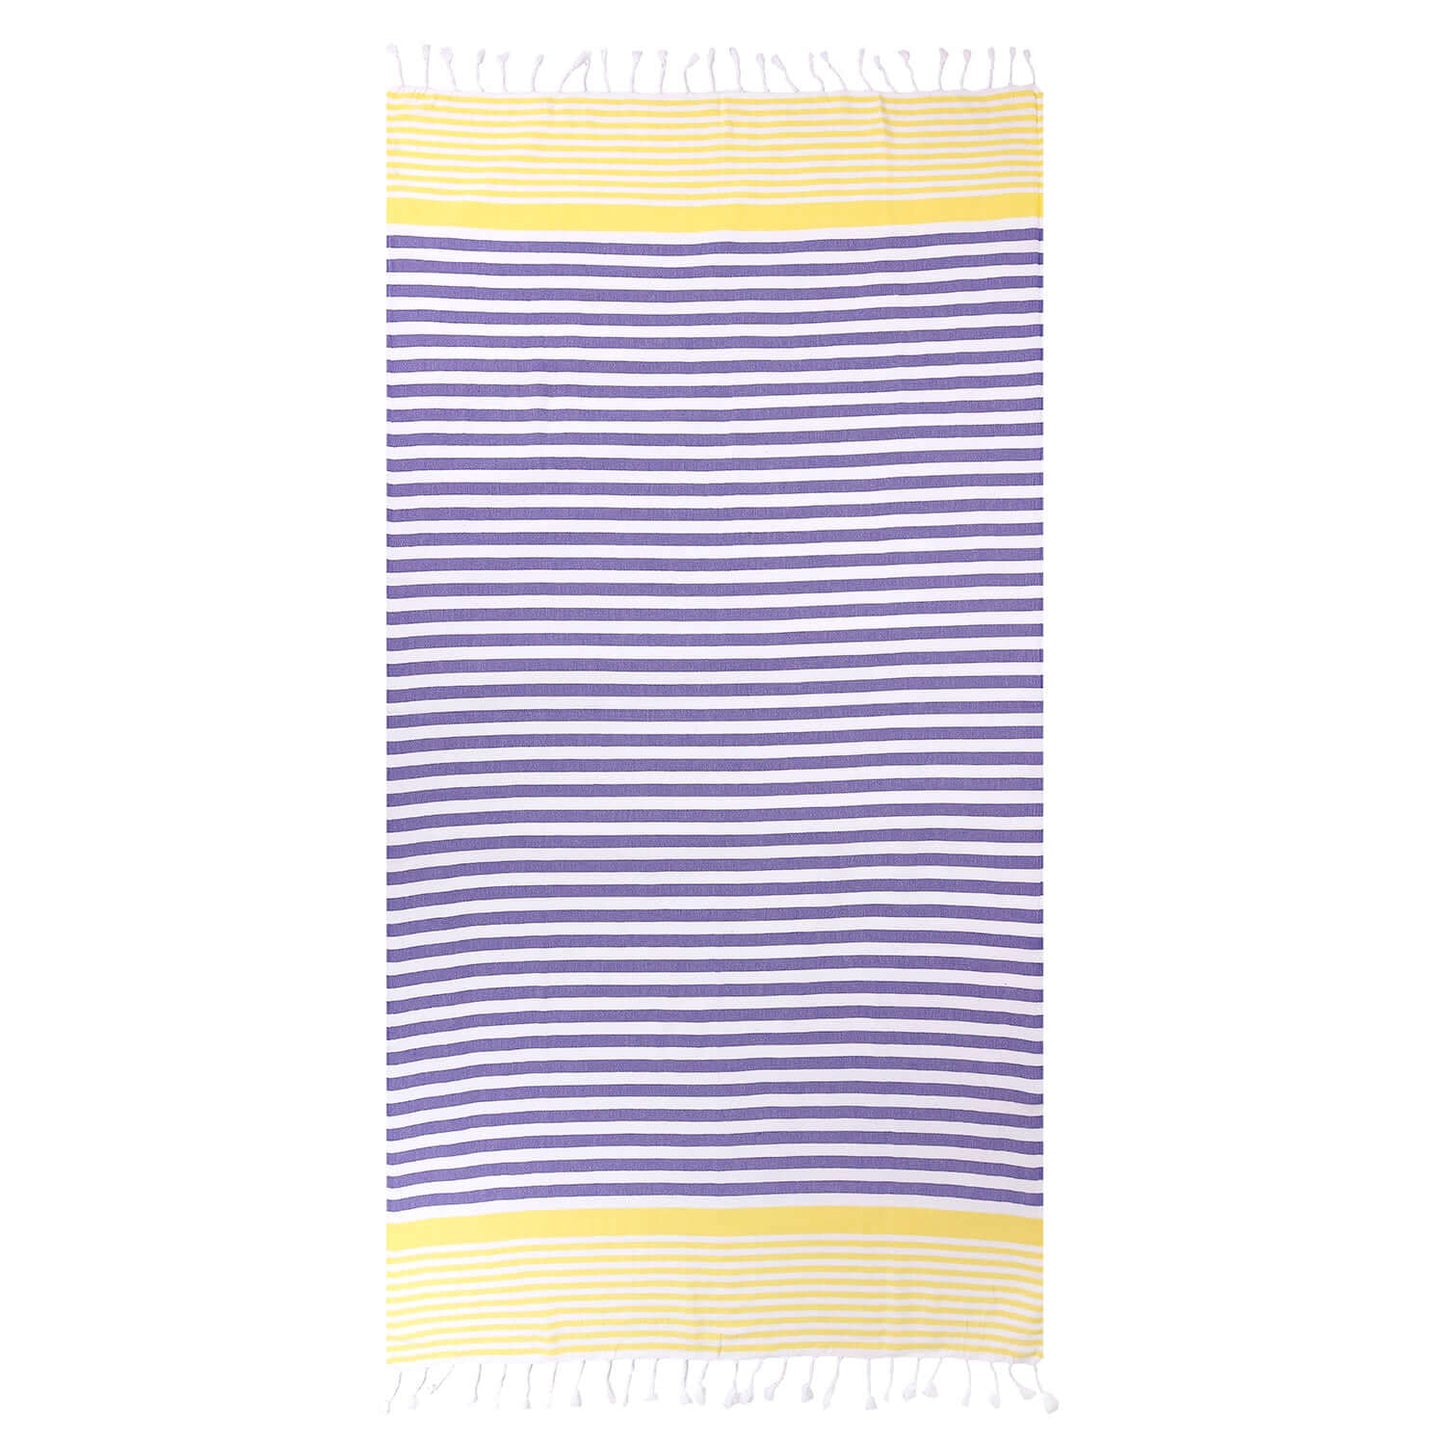 Loom Legacy purple and yellow beach towel with subtle horizontal stripes and white tassels along the top and bottom edges, displayed against a white background.